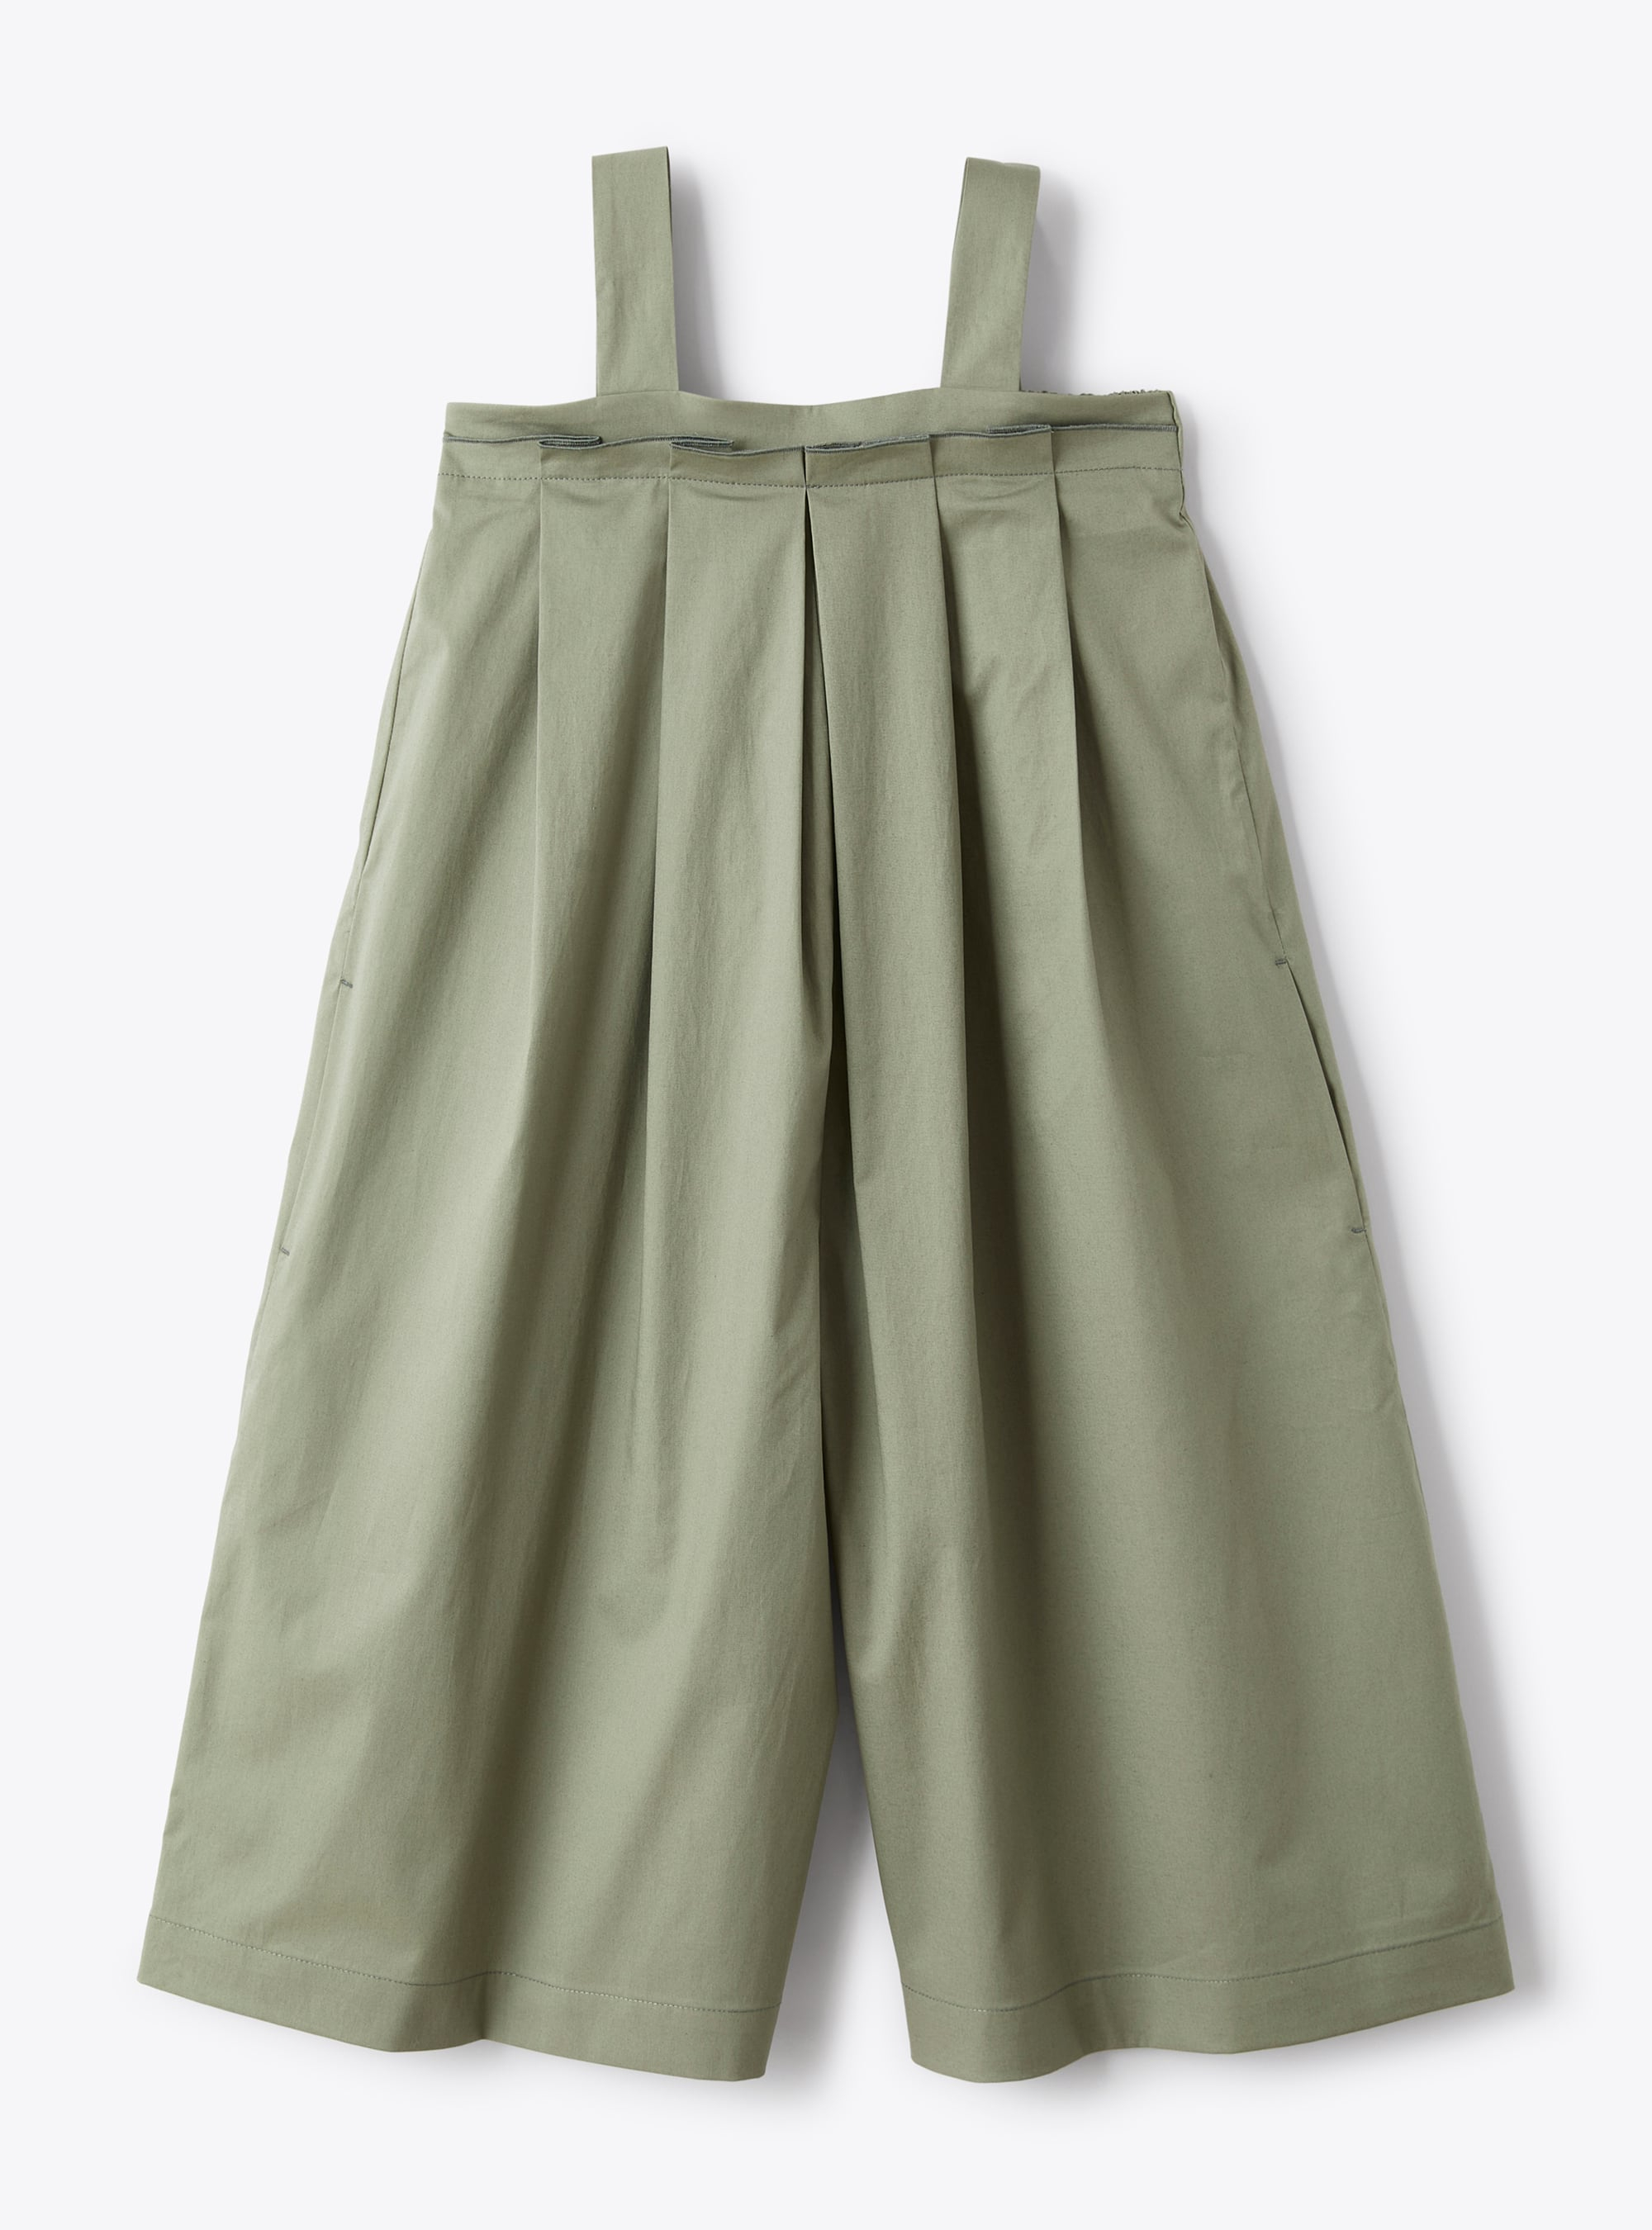 Dungarees in stretch sage-green poplin - Trousers - Il Gufo